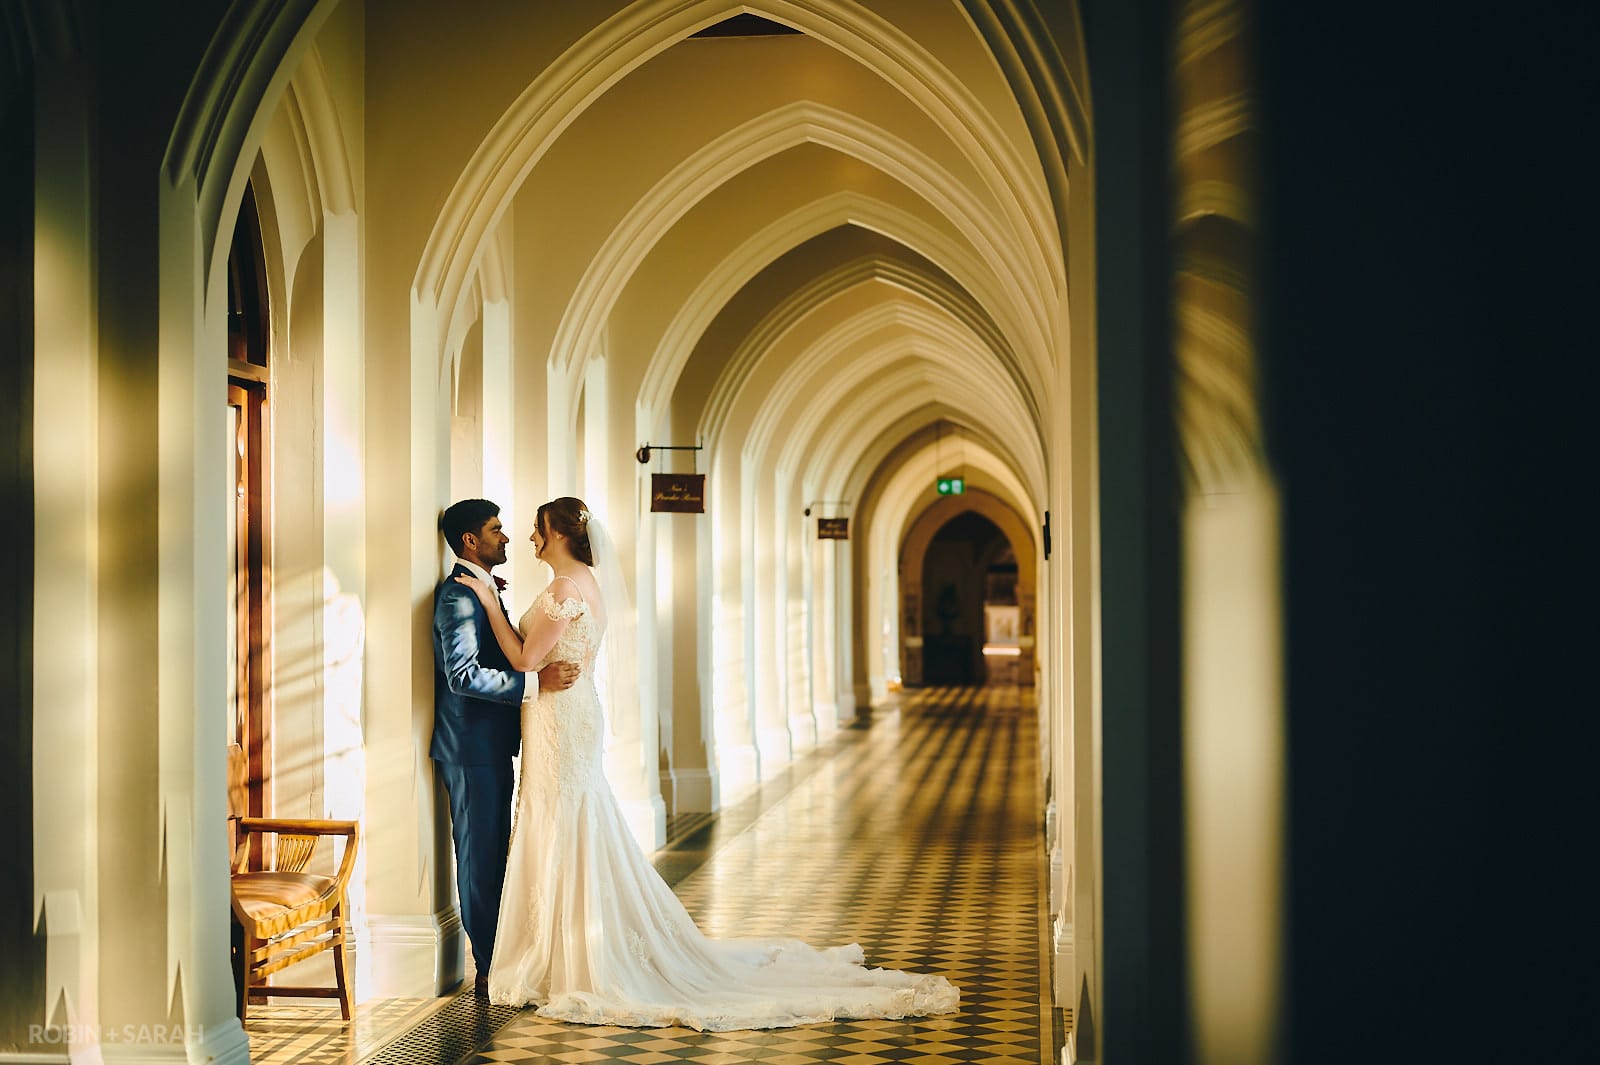 Bride and groom share a quiet moment together in cloister corridor at Stanbrook Abbey